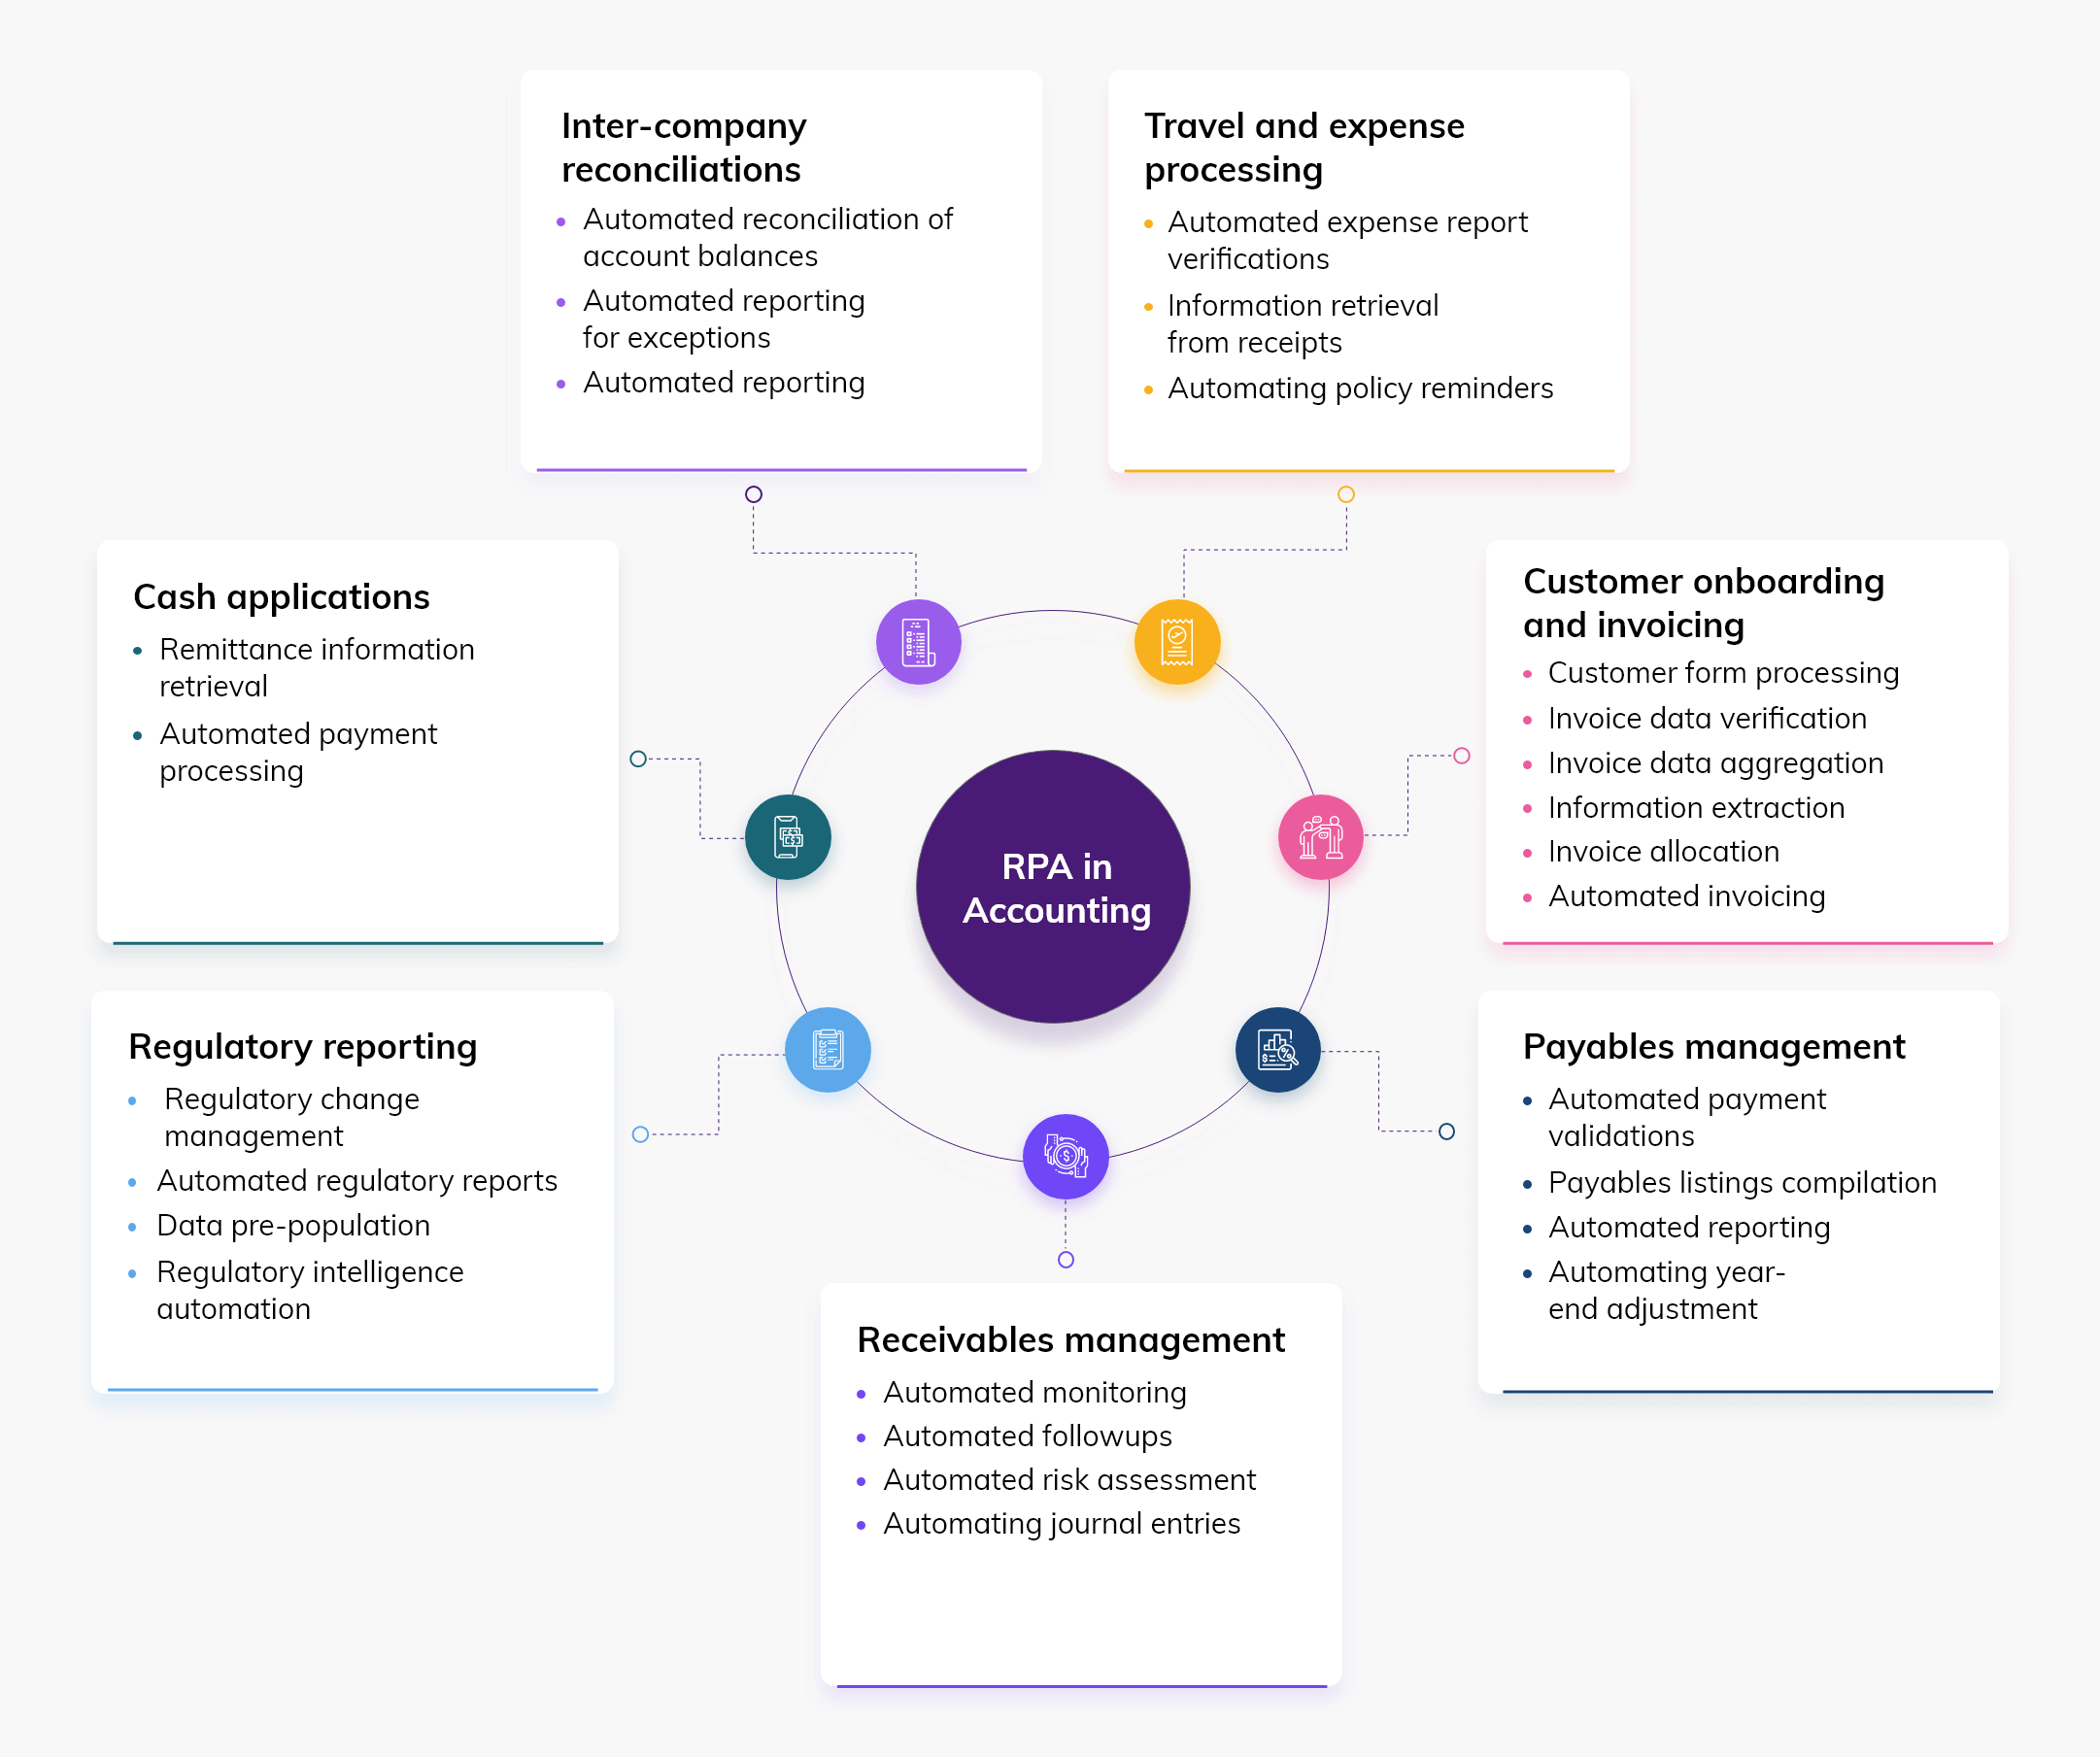 Possibilities of RPA in accounting, how to get started?